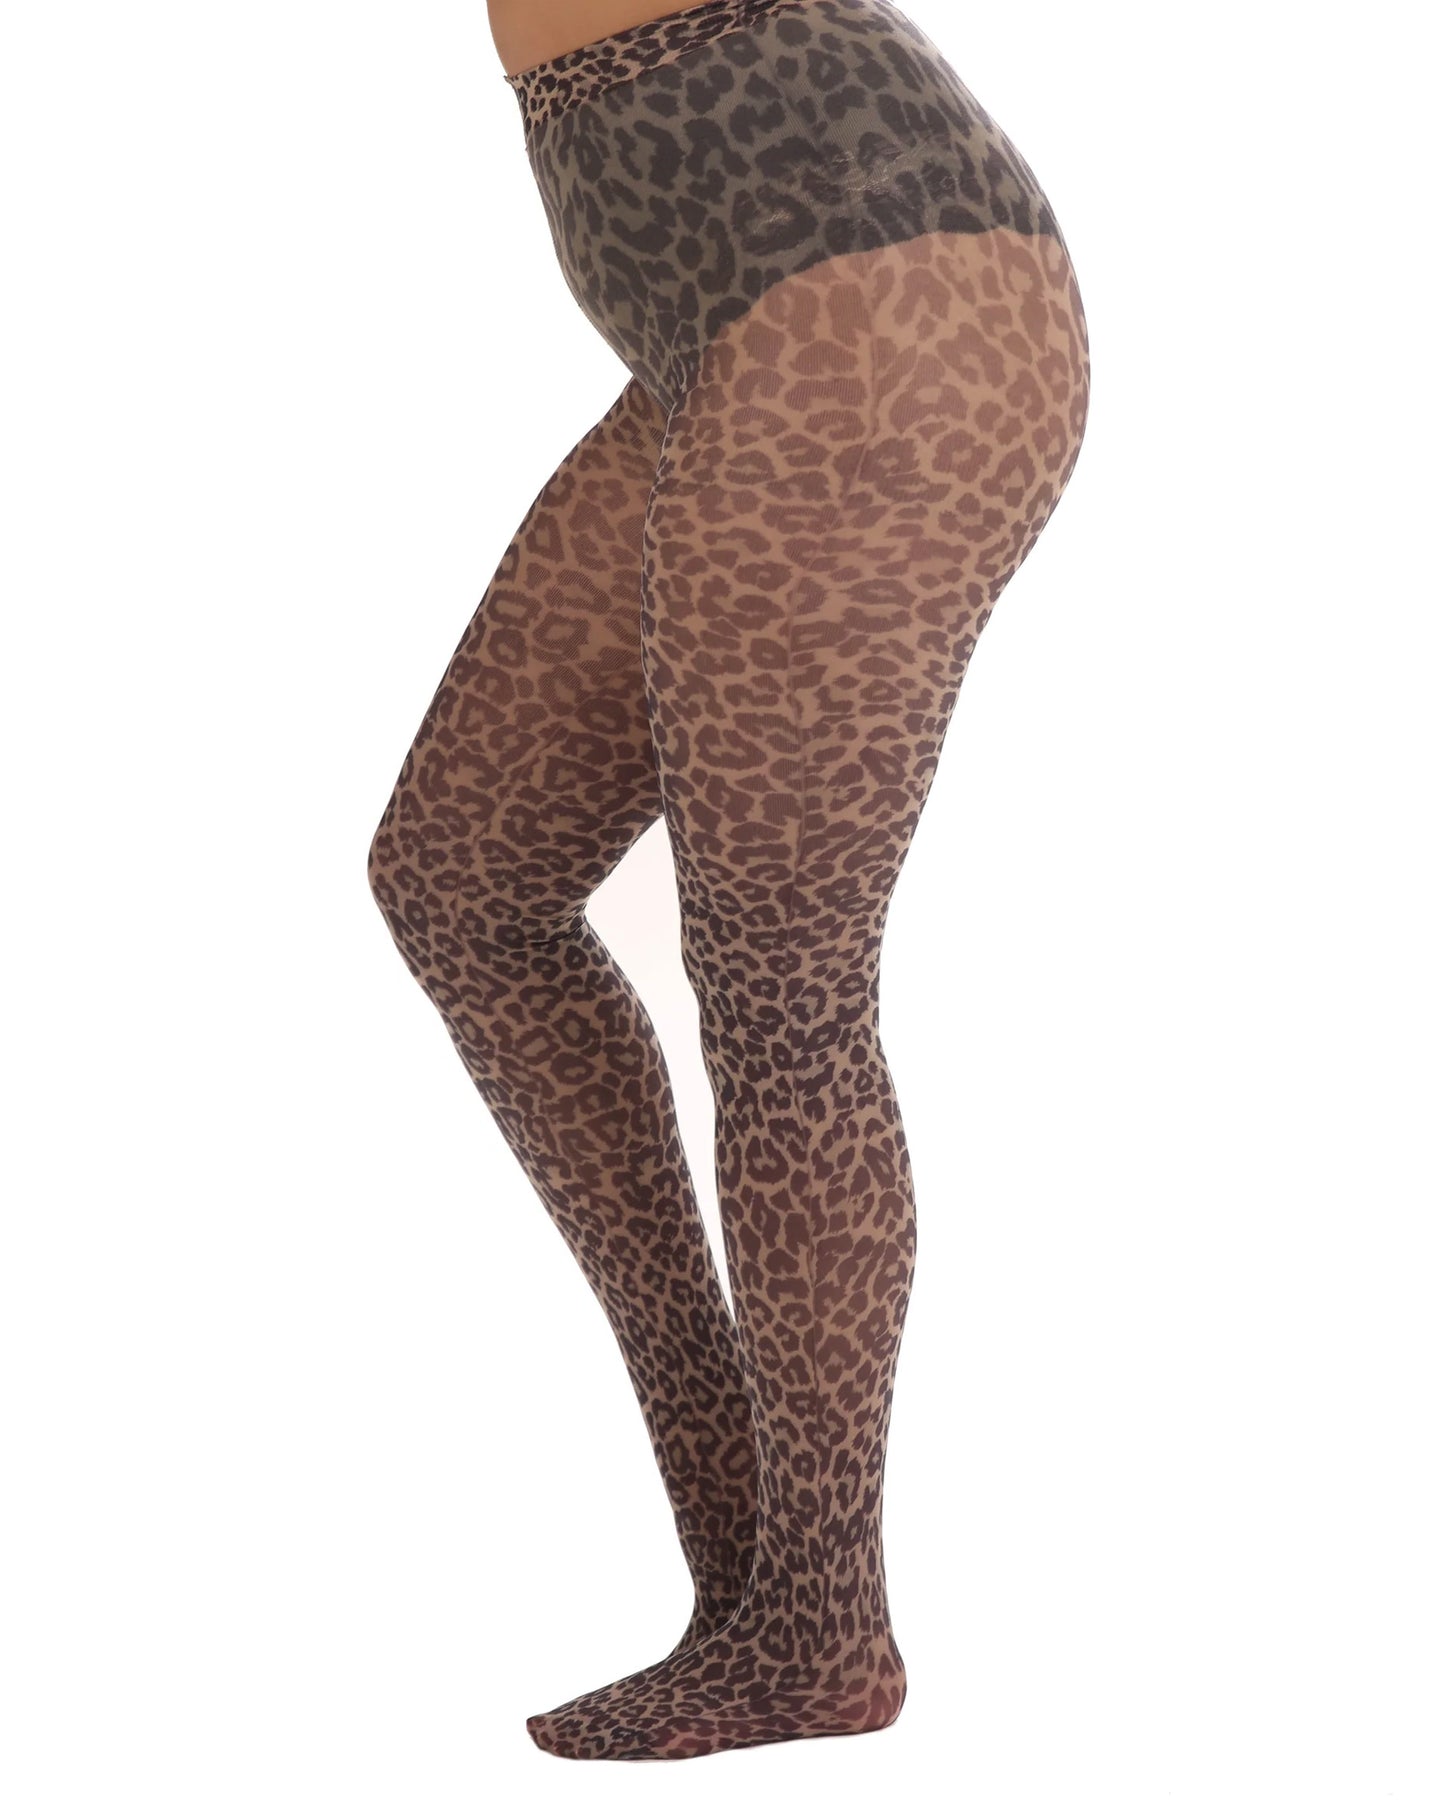 Pamela Mann Leopard Curvy Tights - White super stretch curvy plus size tights with an all over leopard print pattern in shades of brown, nude and black, side view.